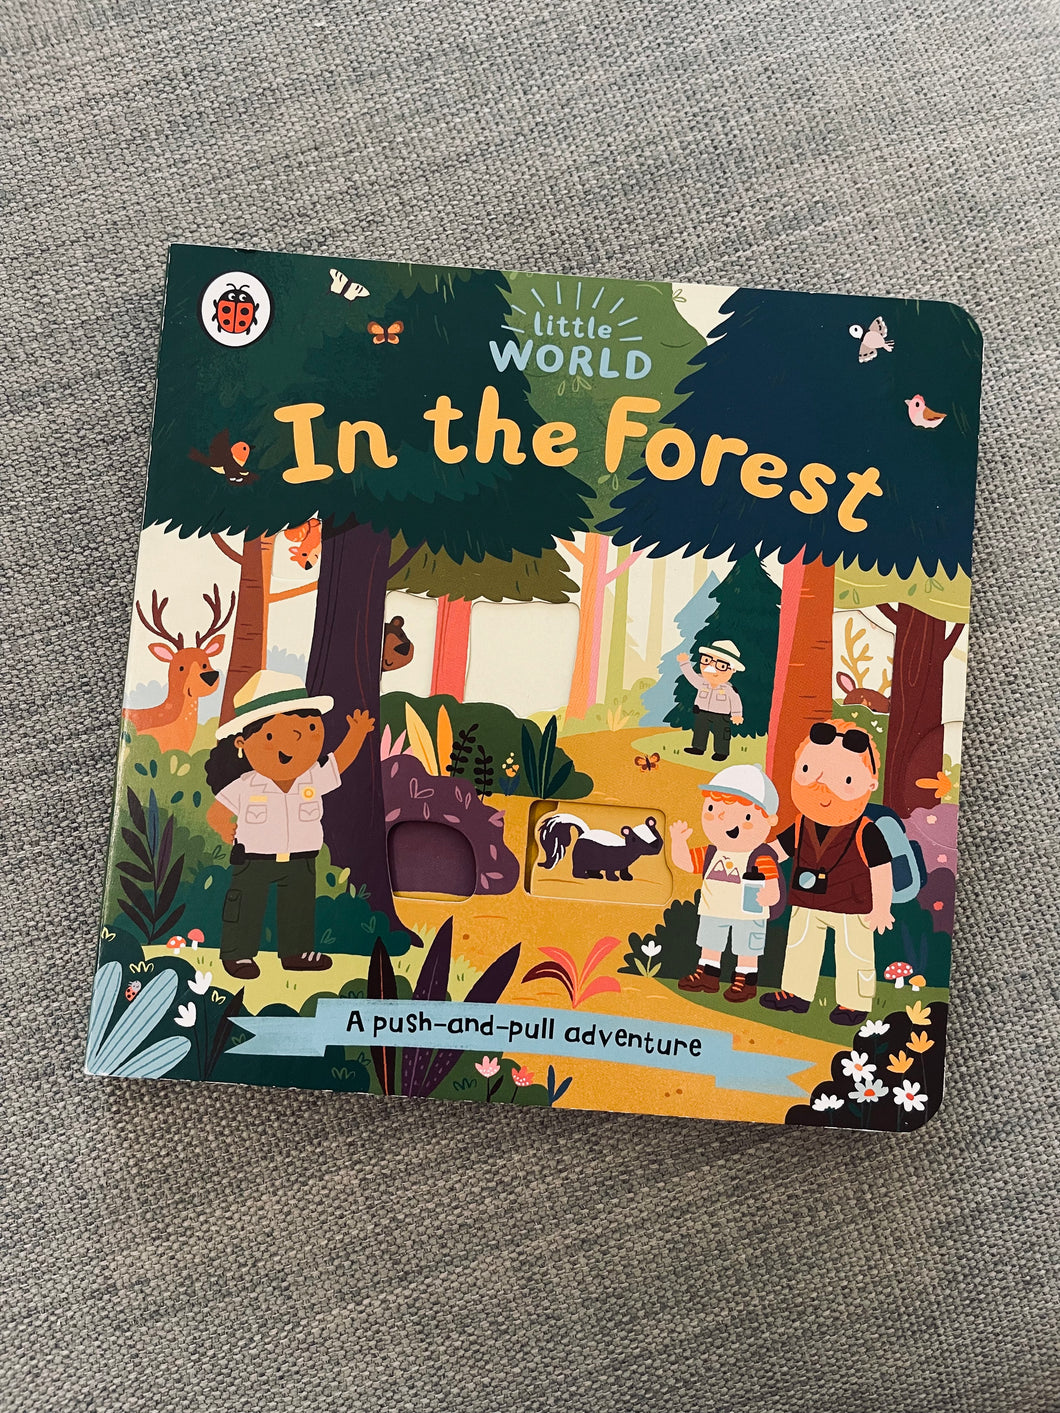 Little World: In the forest